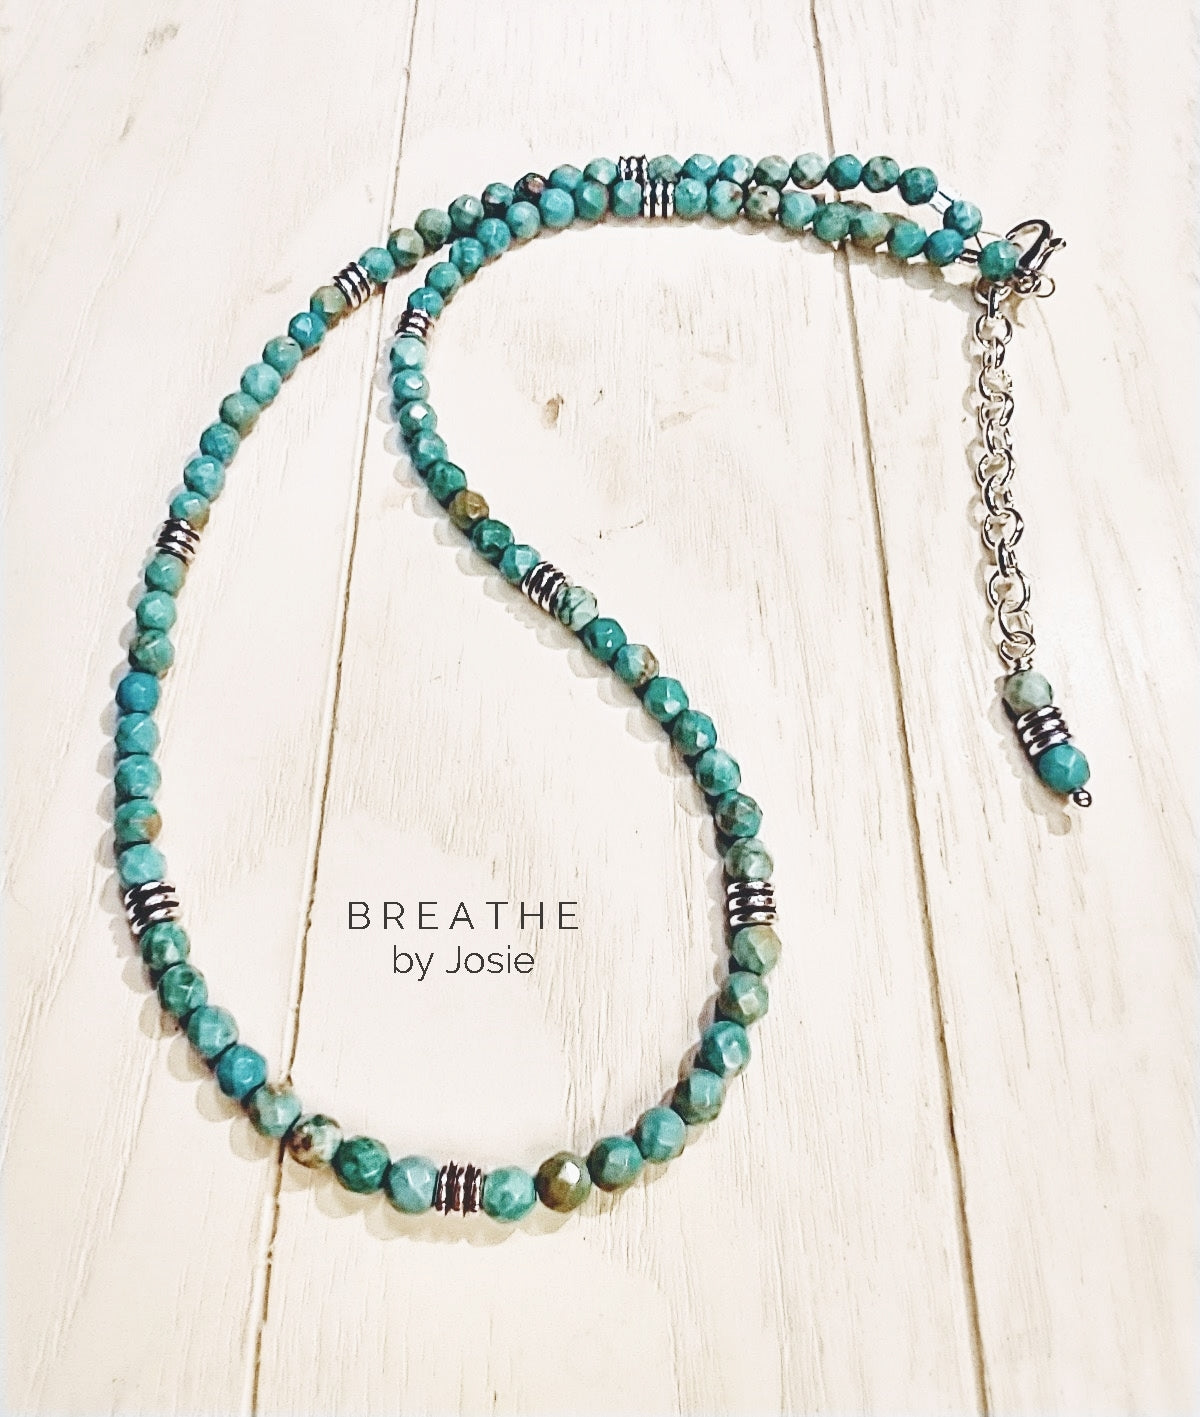 Turquoise + Silver Gemstone Necklace